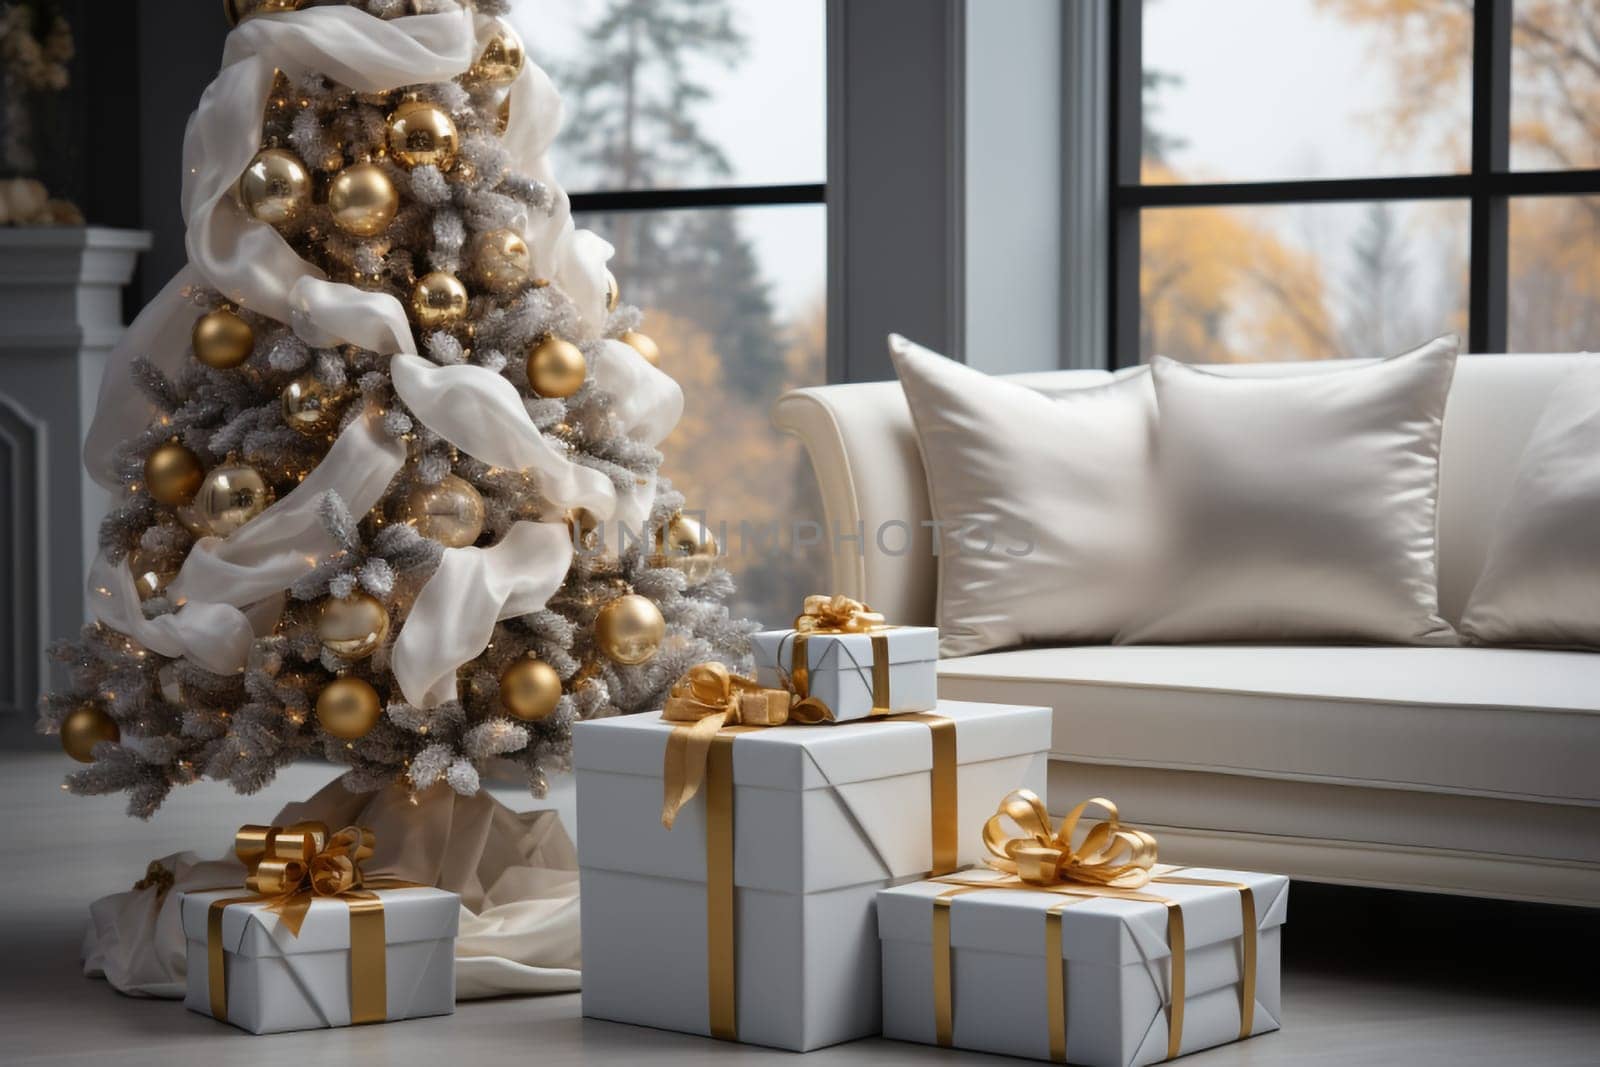 White modern home decorated for Christmas or New Year with a Christmas tree and gifts, a sofa and an illuminated window creating a warm festive atmosphere.